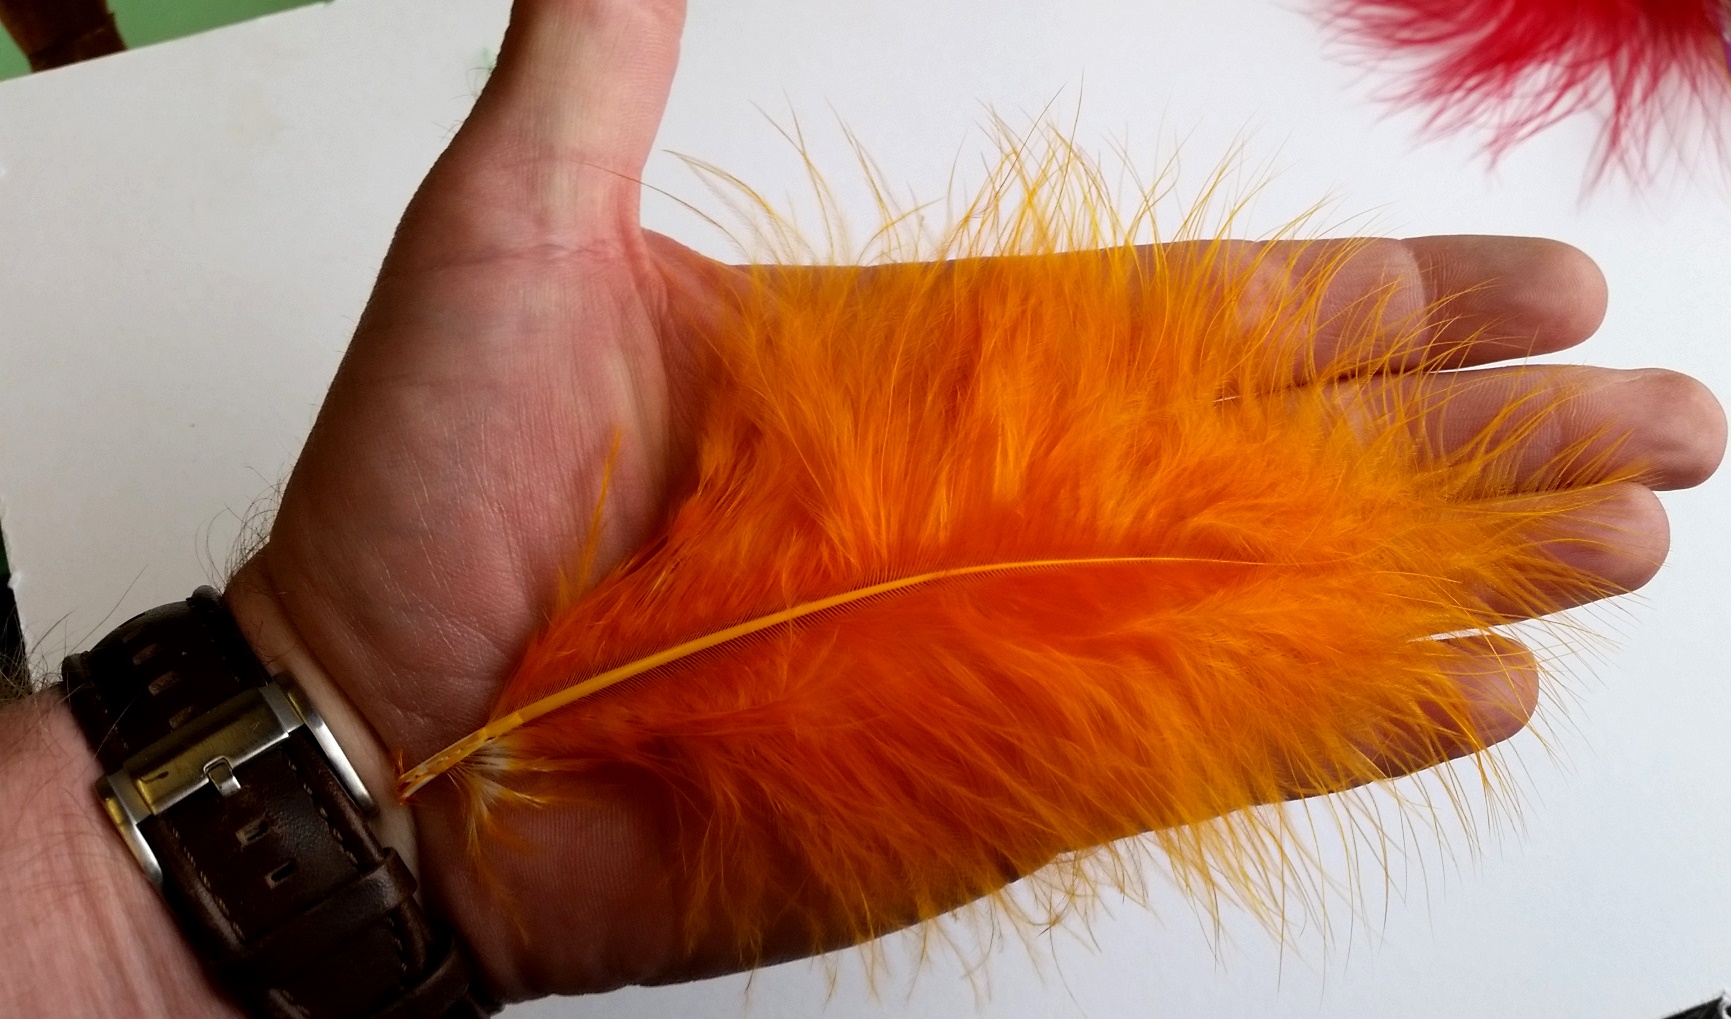 Fly tying- Extra Long Marabou for Tube Flies